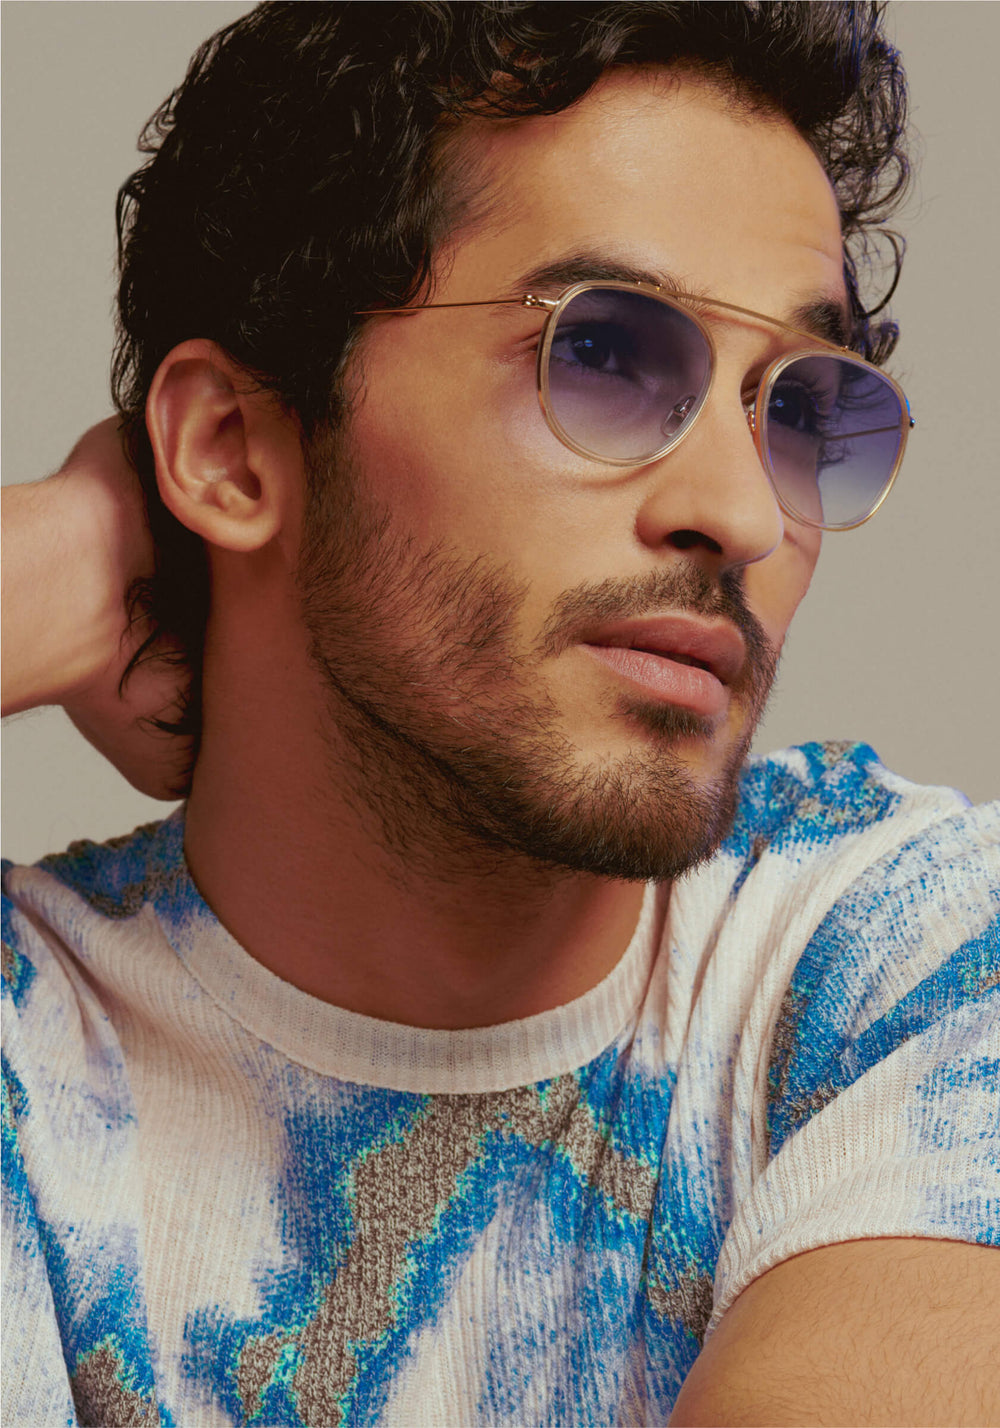 KREWE SUNGLASSES - CHARTRES | Crystal 24K + Custom Vanity Tint Handrafted, luxury 24k gold plated aviators with custom blue gradient tinted lenses mens model campaign | Model: Mo